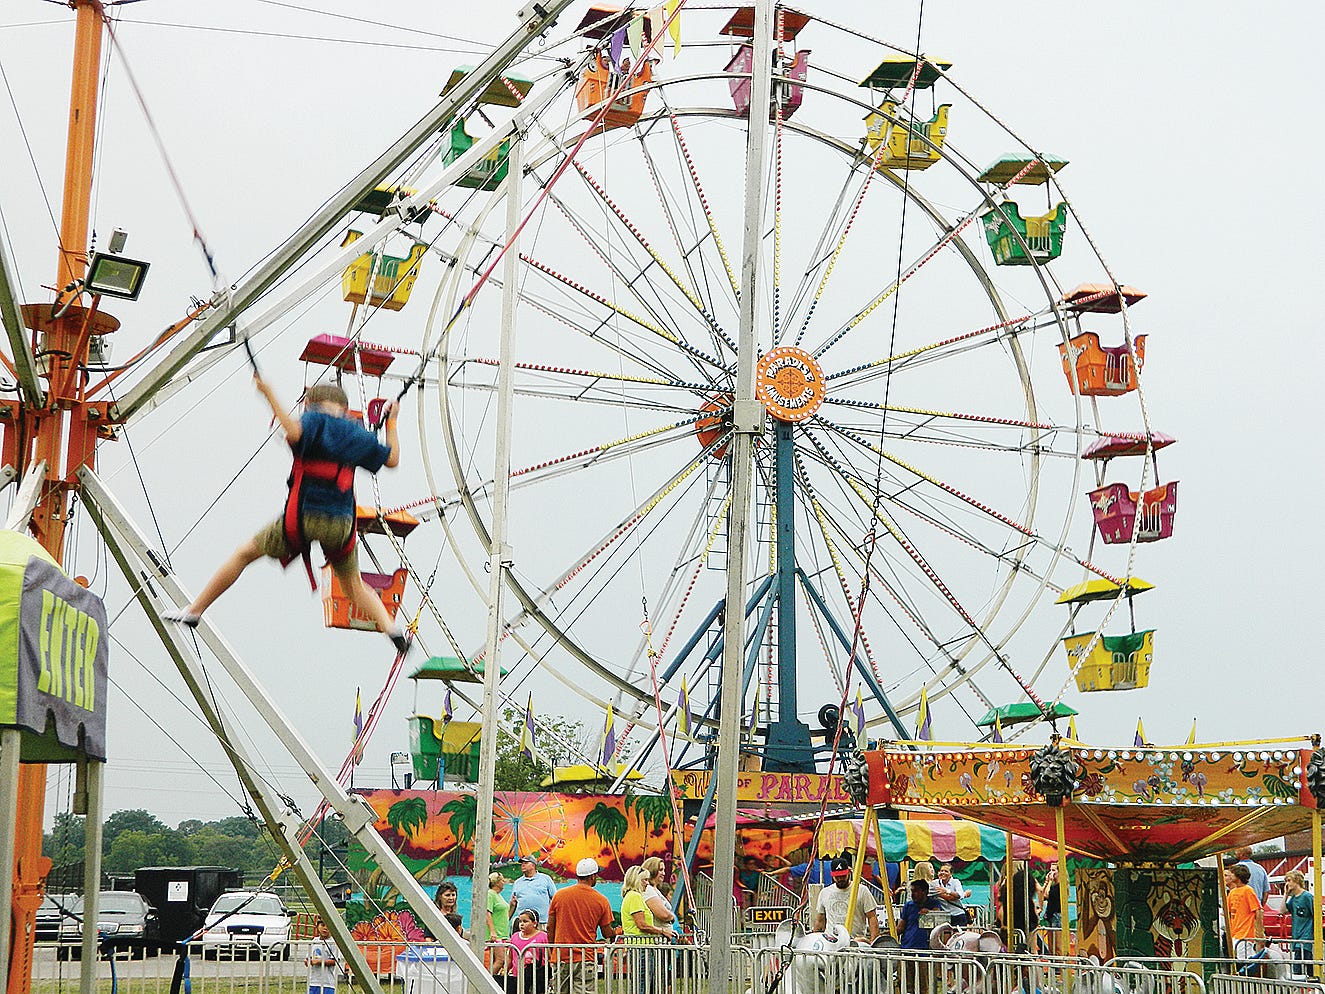 Anderson County Fair opens July 18